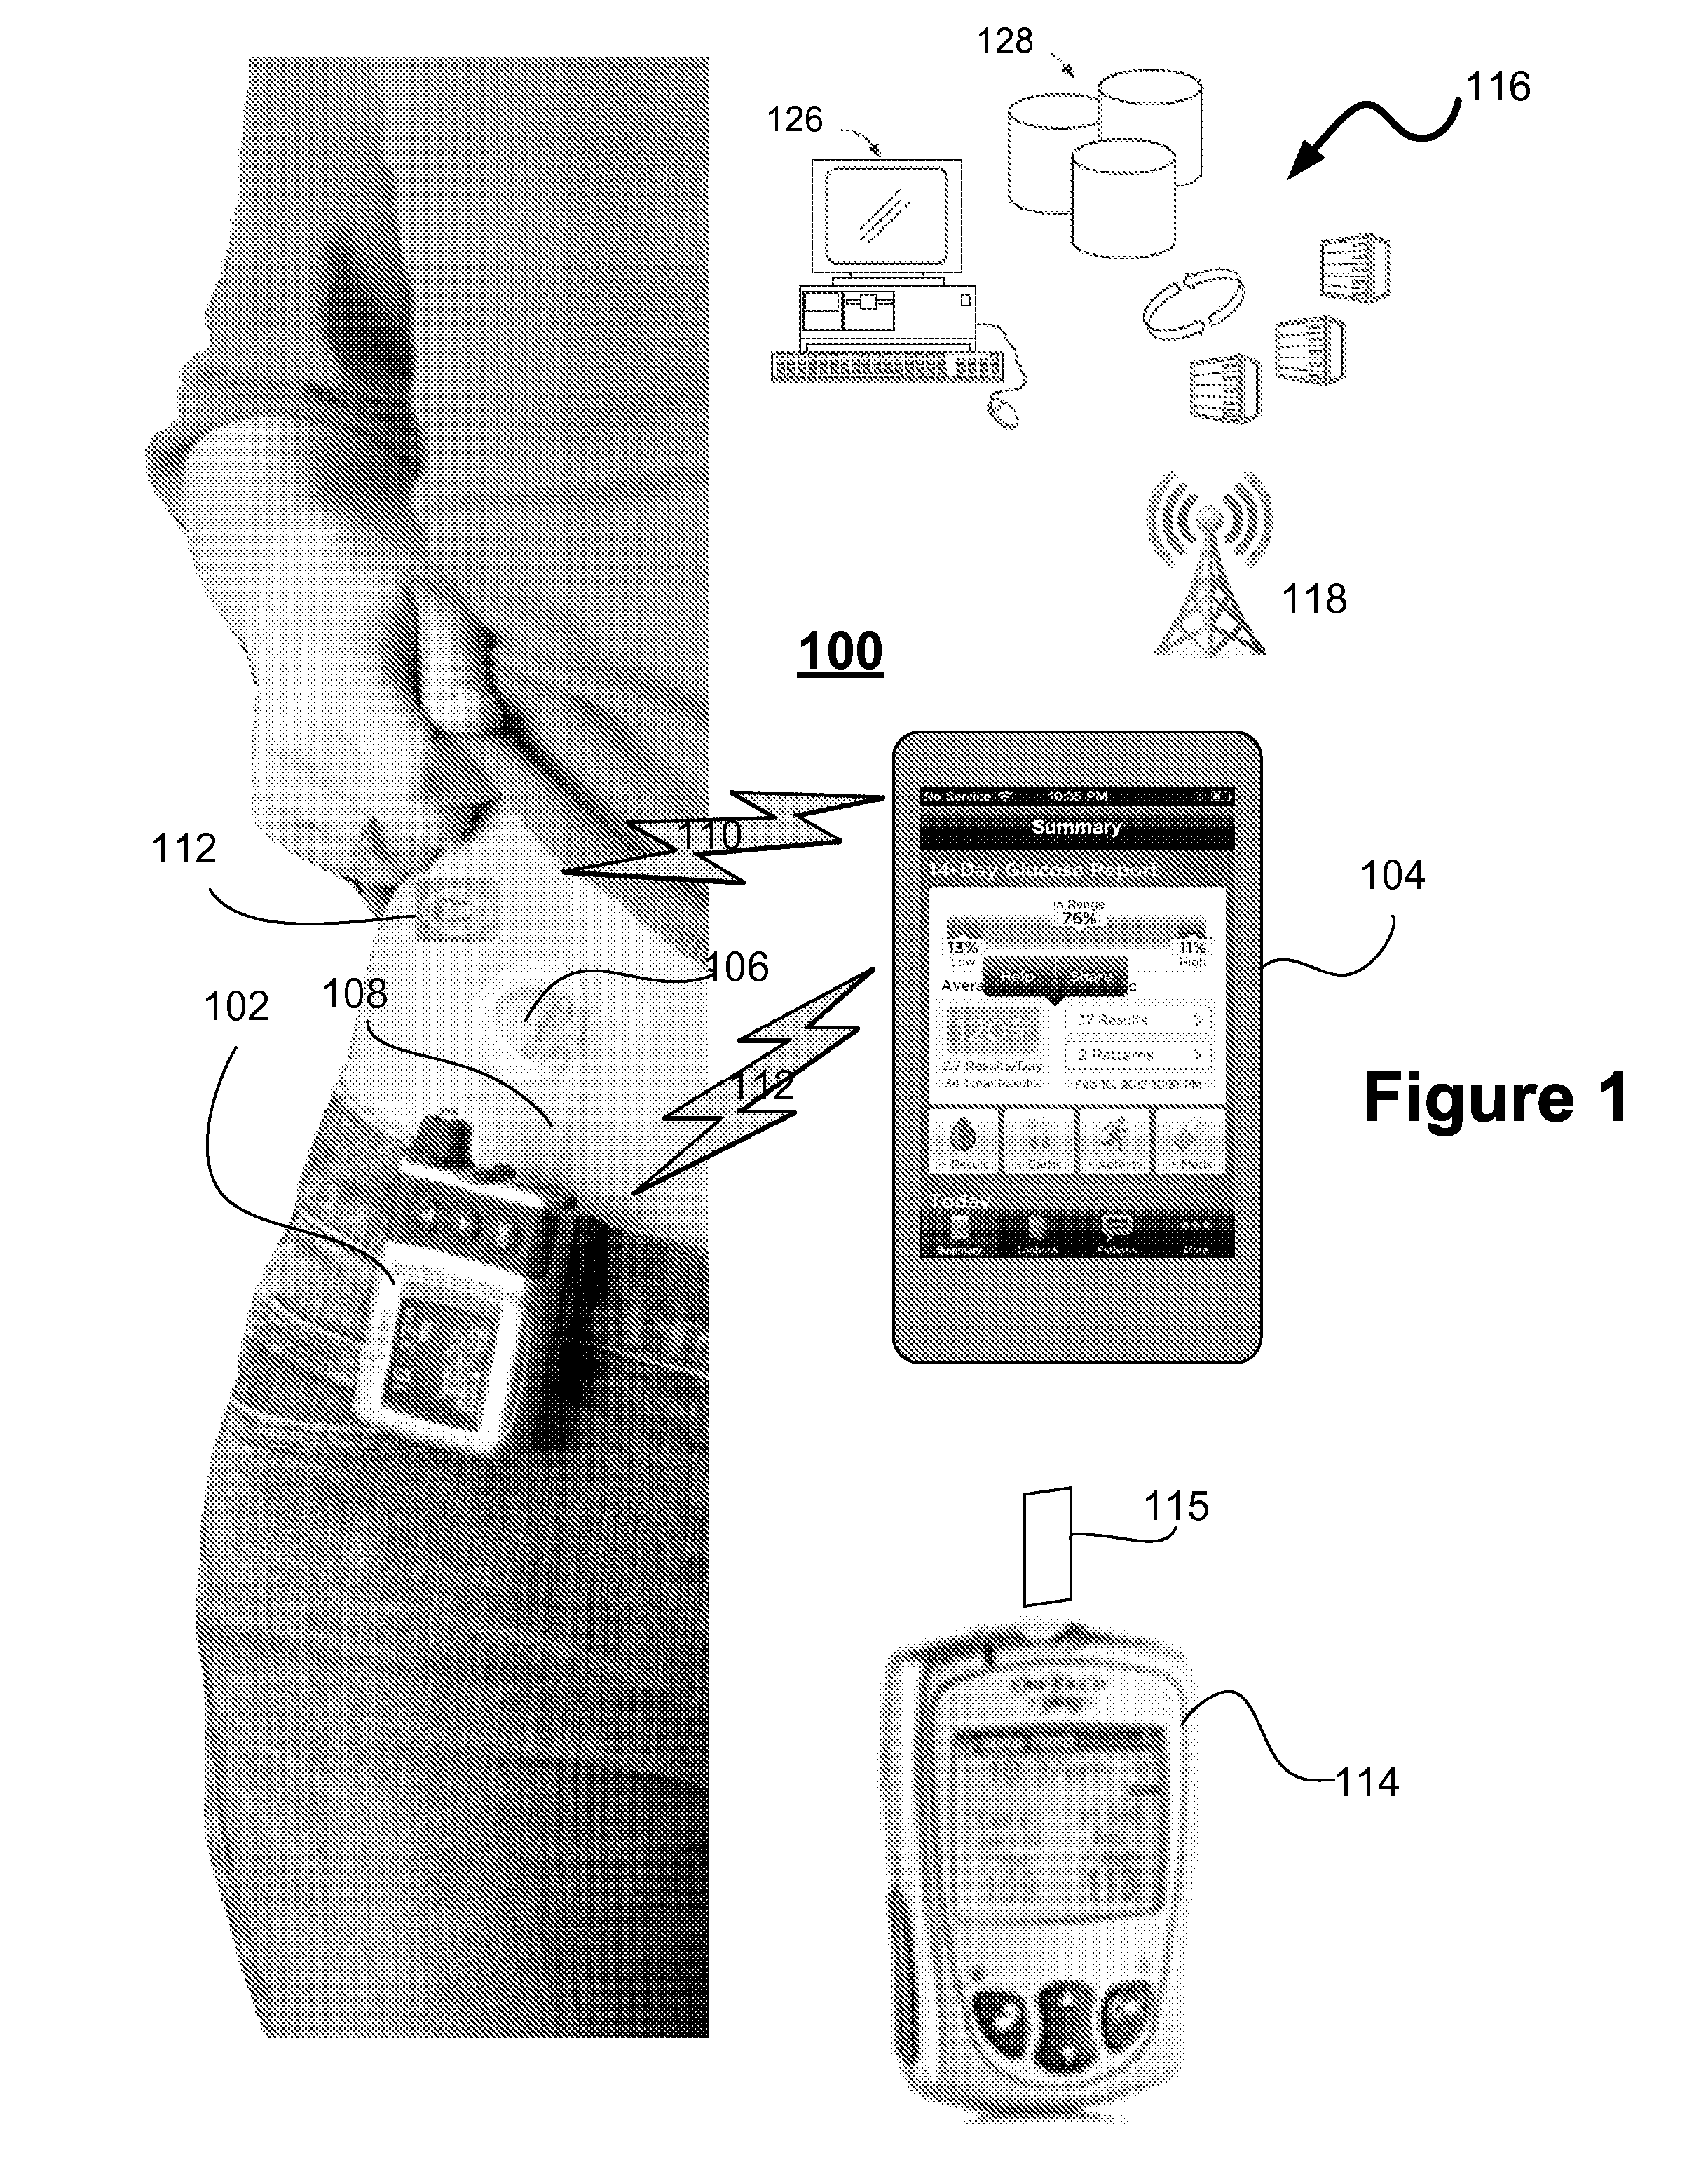 Method and system for controlling a tuning factor due to sensor replacement for closed-loop controller in an artificial pancreas